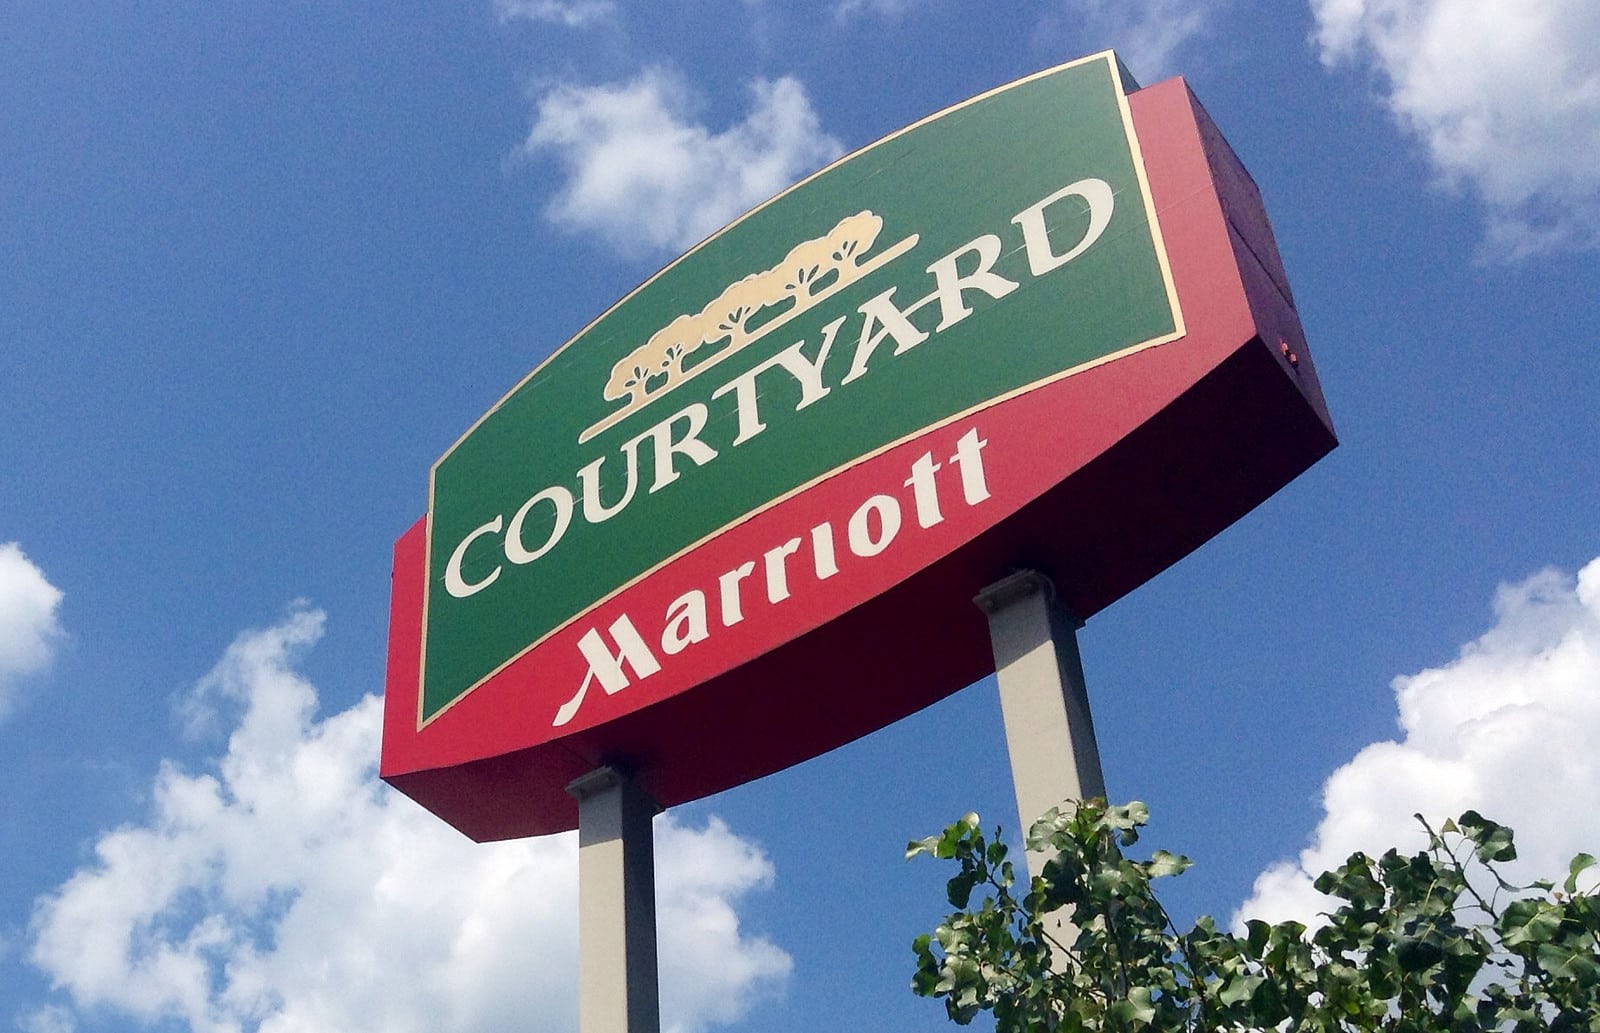 Courtyard by Marrriott is among the brands building the most new rooms in the U.S. this year. 